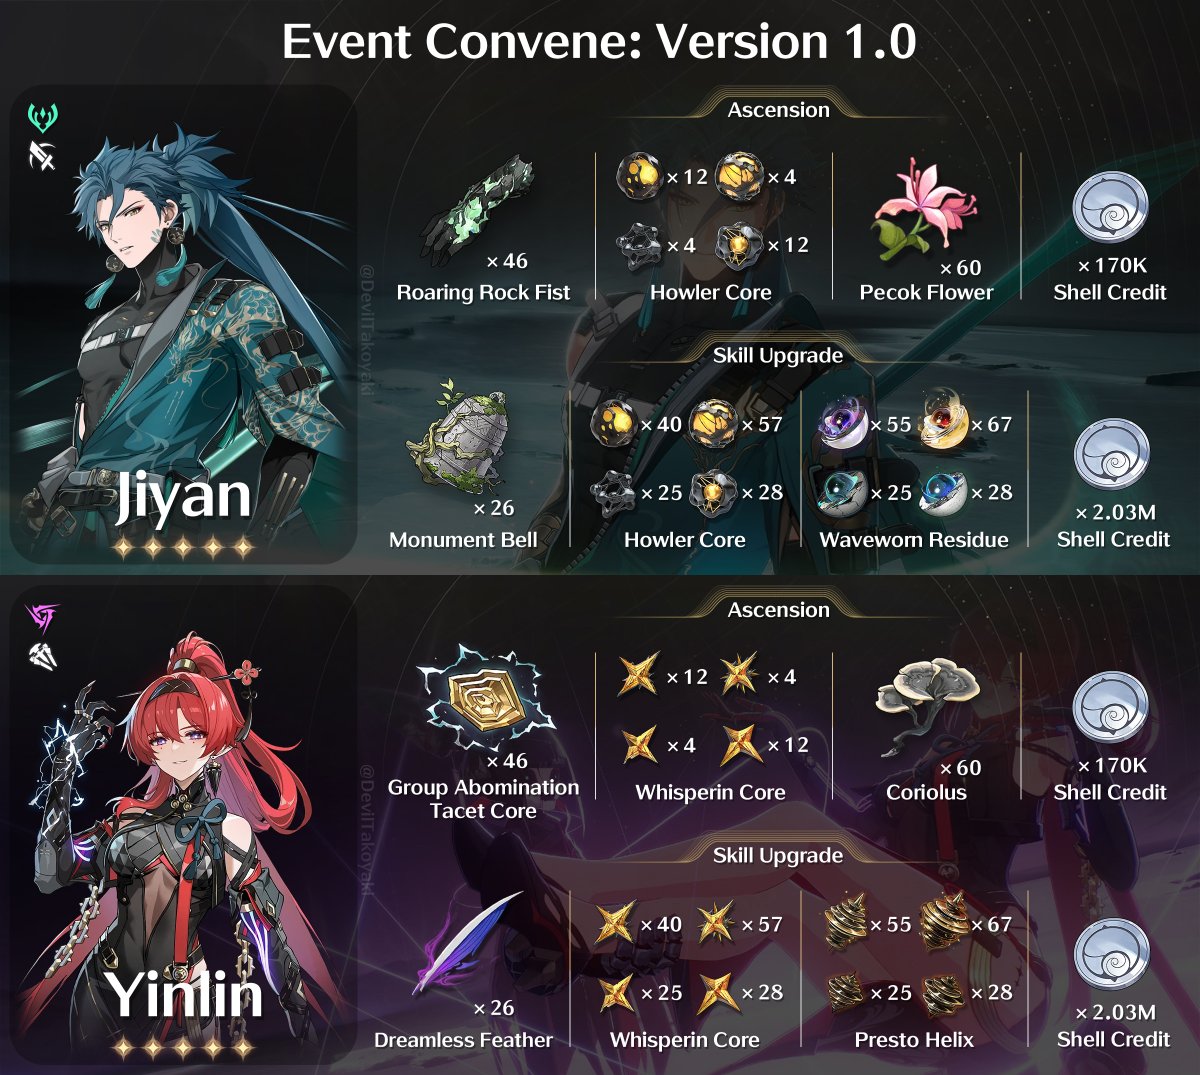 Event Convene: Version 1.0 

5✦ Jiyan (Aero, Broadblade)
5✦ Yinlin (Electro, Rectifier)

※ Repost to fix the total number for all material under skill upgrade, since it didn't include the stat bonus and inherent skill mats. Sorry about that. 

#WutheringWaves #鸣潮